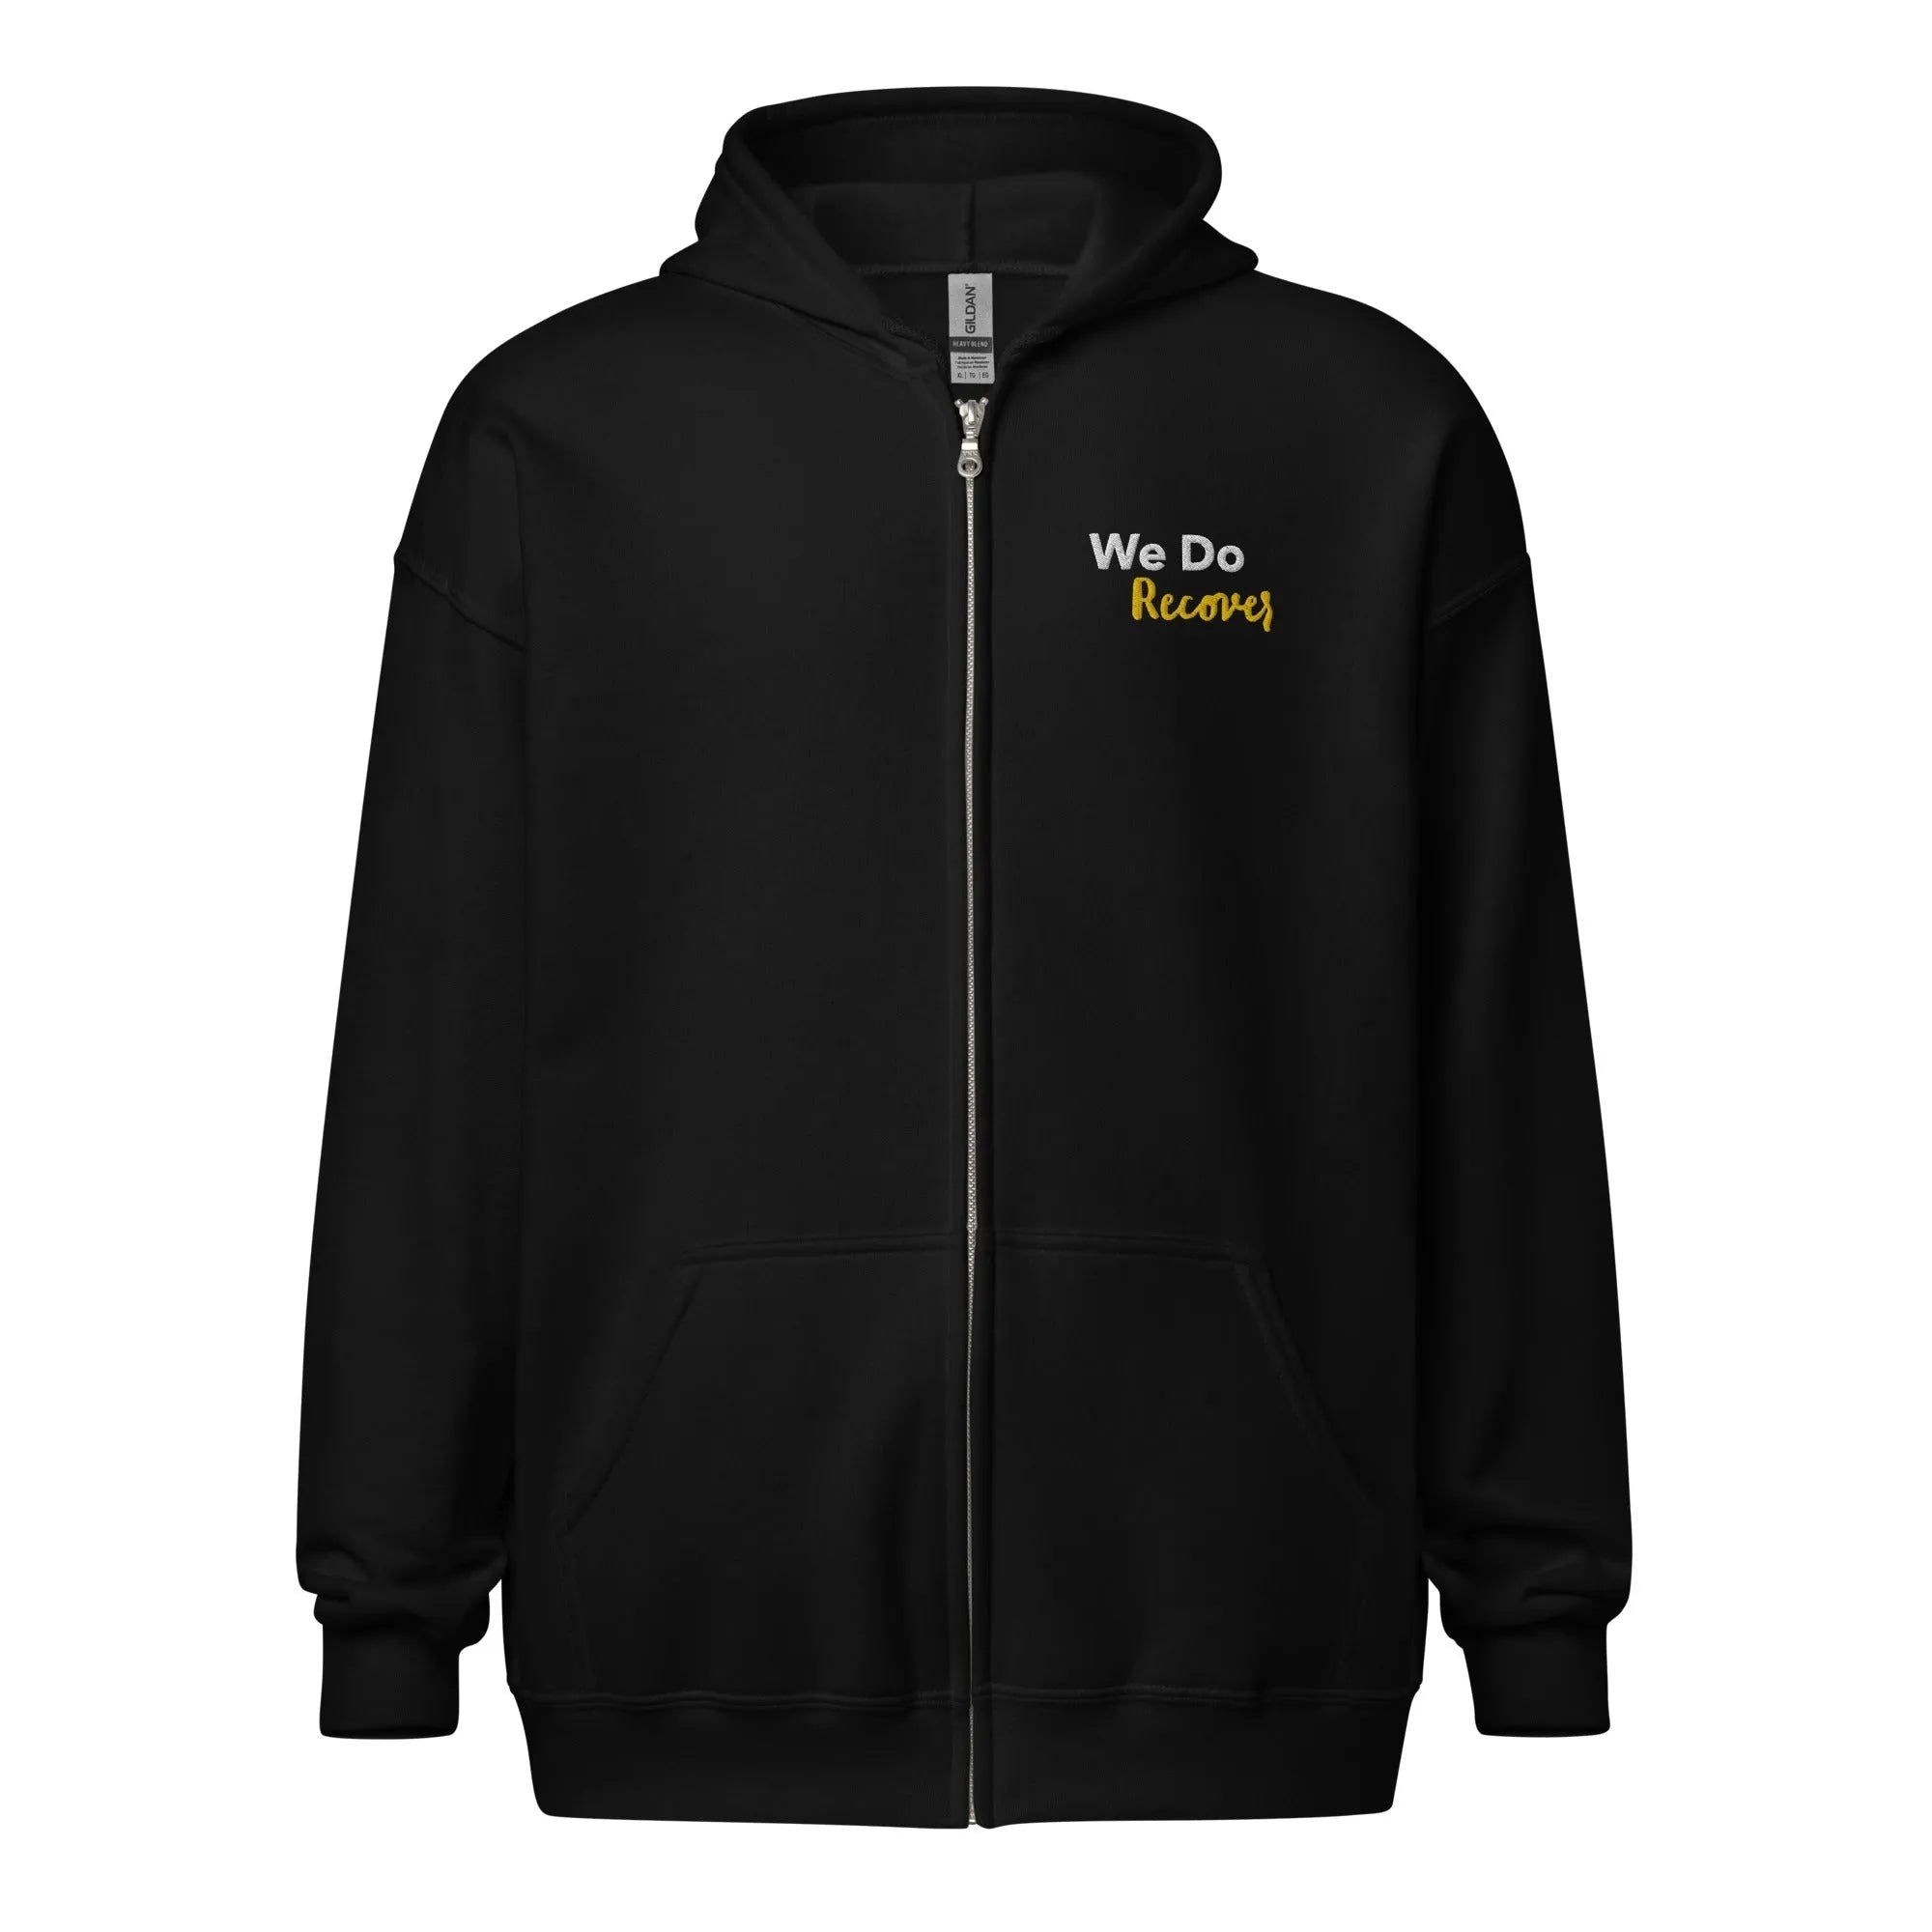 We Do Recover - Embroidered Unisex heavy blend zip hoodie - Sobervation